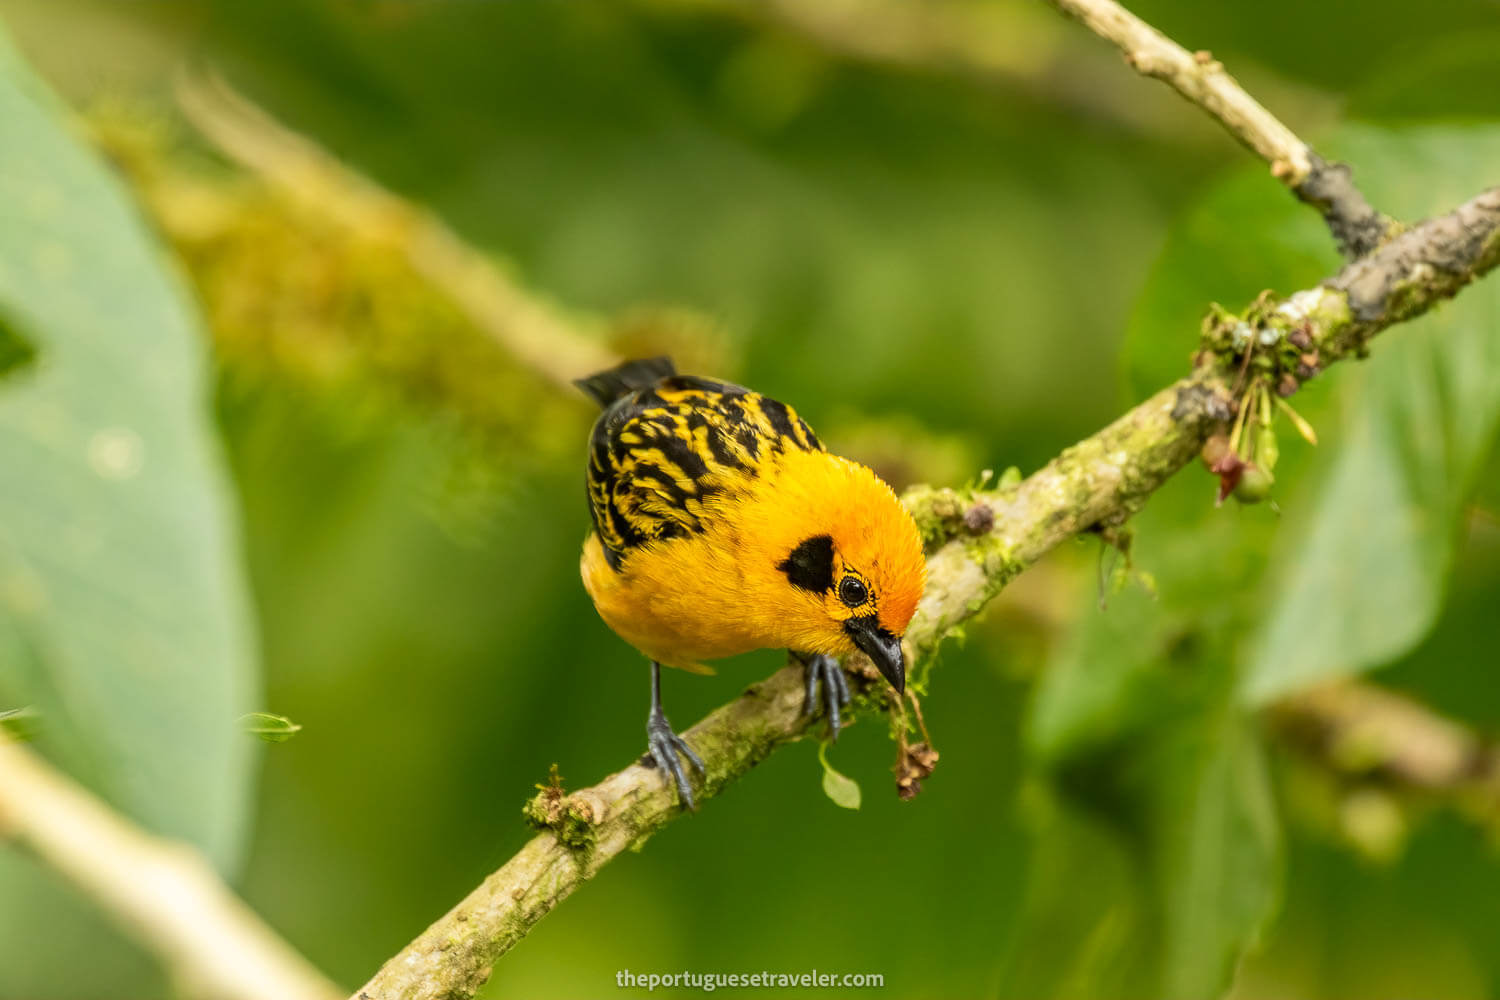 A Golden Tanager on the Birdwatching Tour in Mindo, Ecuador